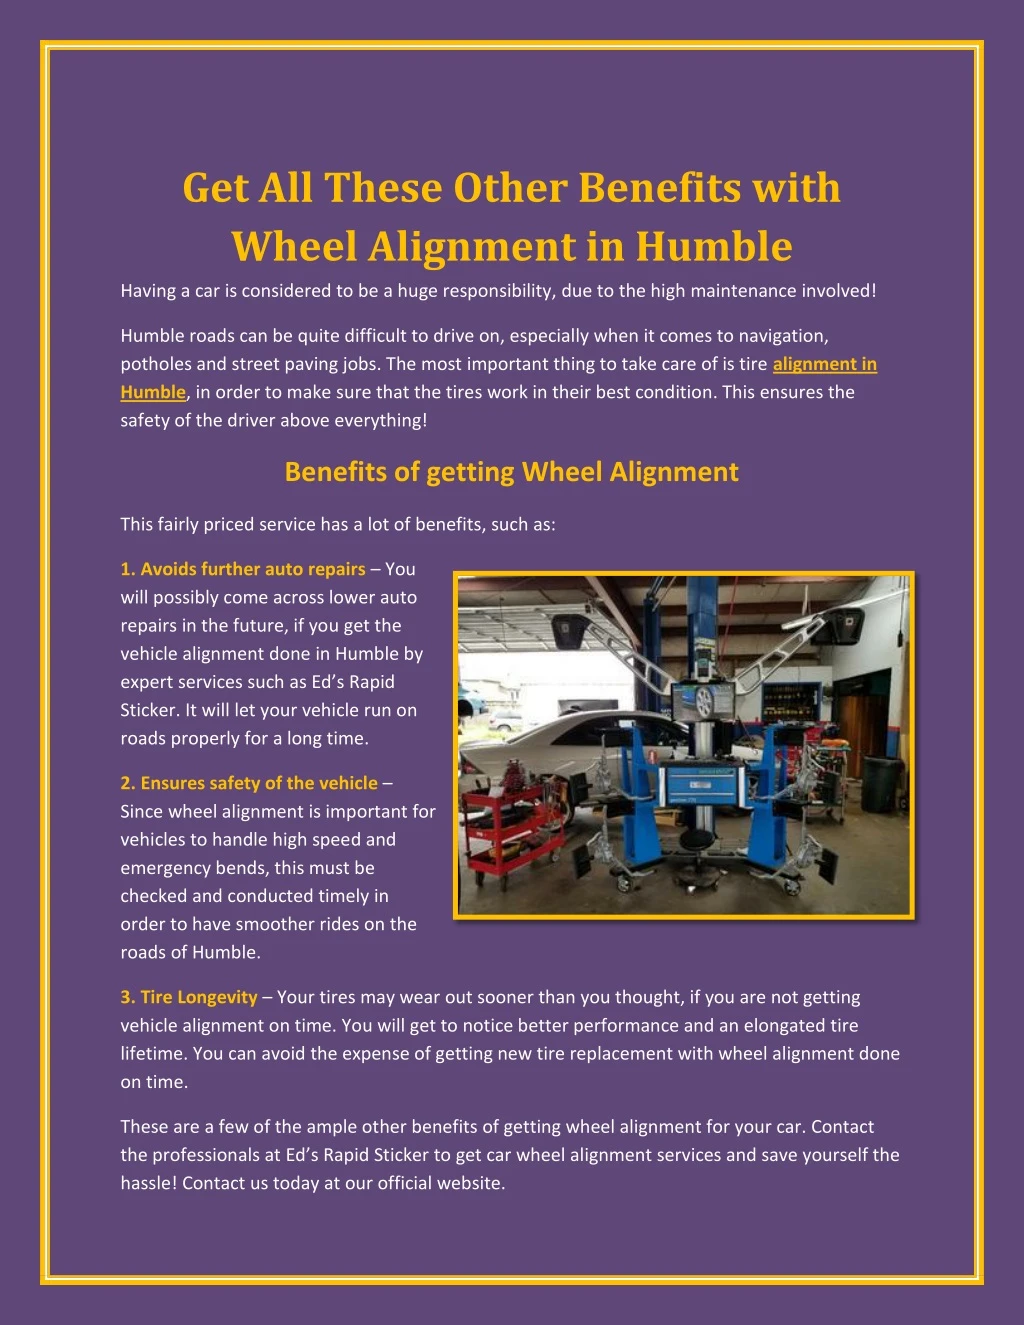 get all these other benefits with wheel alignment